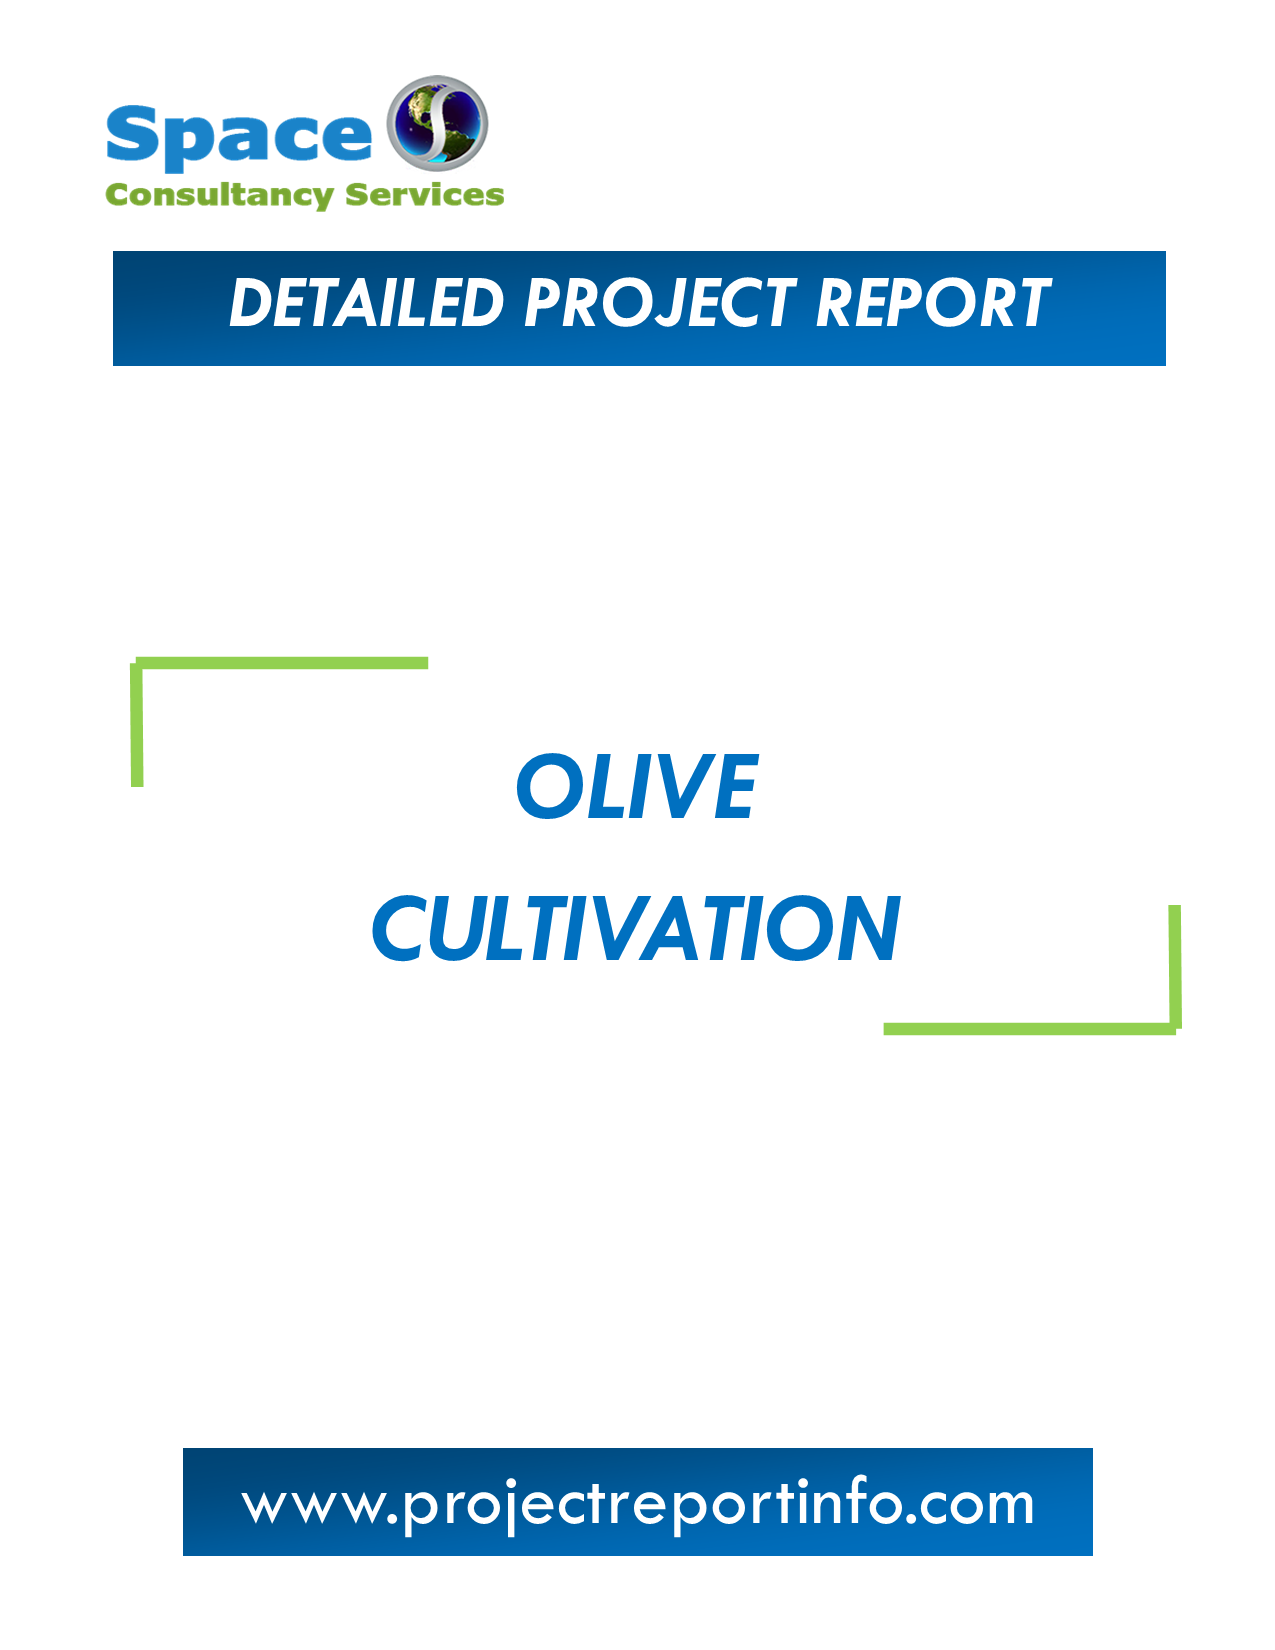 Project Report on Olive Cultivation